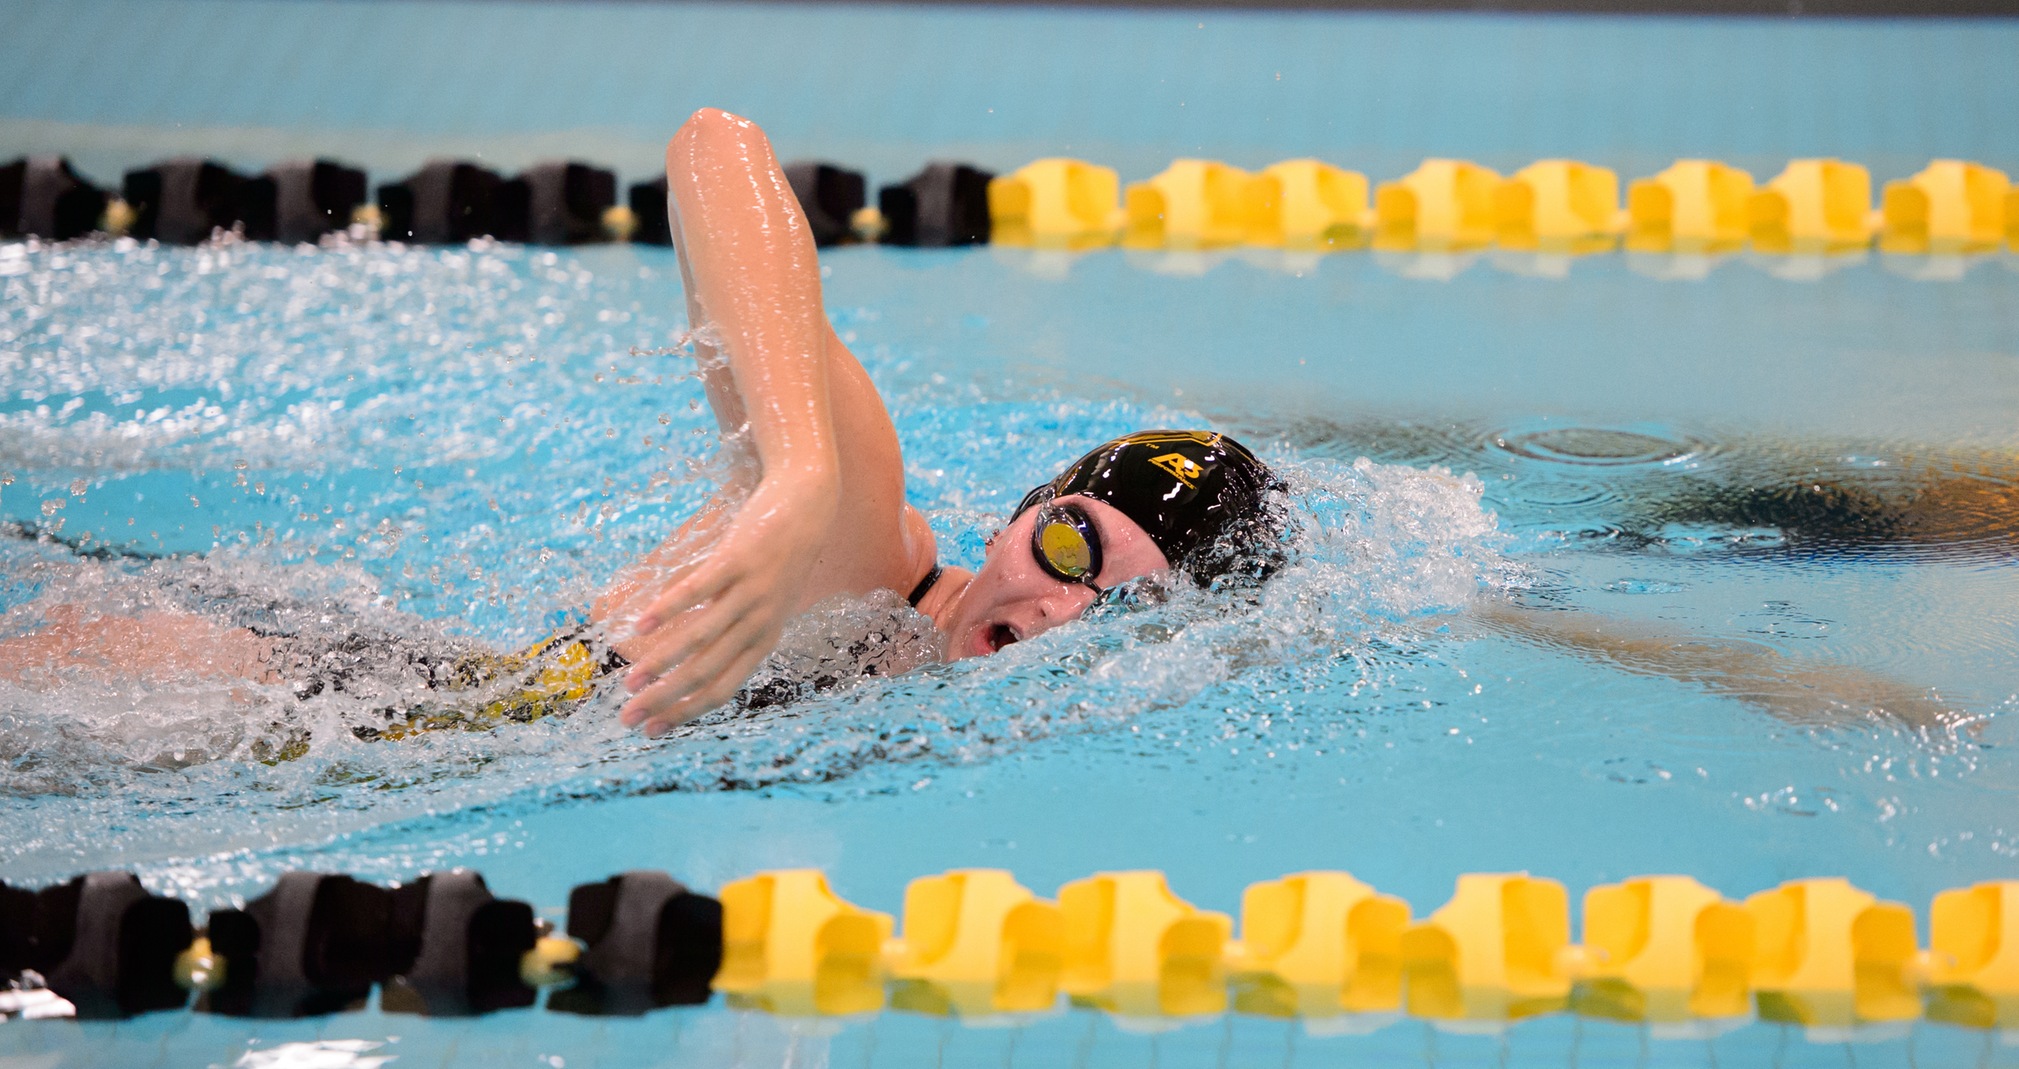 Tessa Shorten won freestyle races at 100 and 200 yards while swimming on a first-place 400-yard medley relay team.